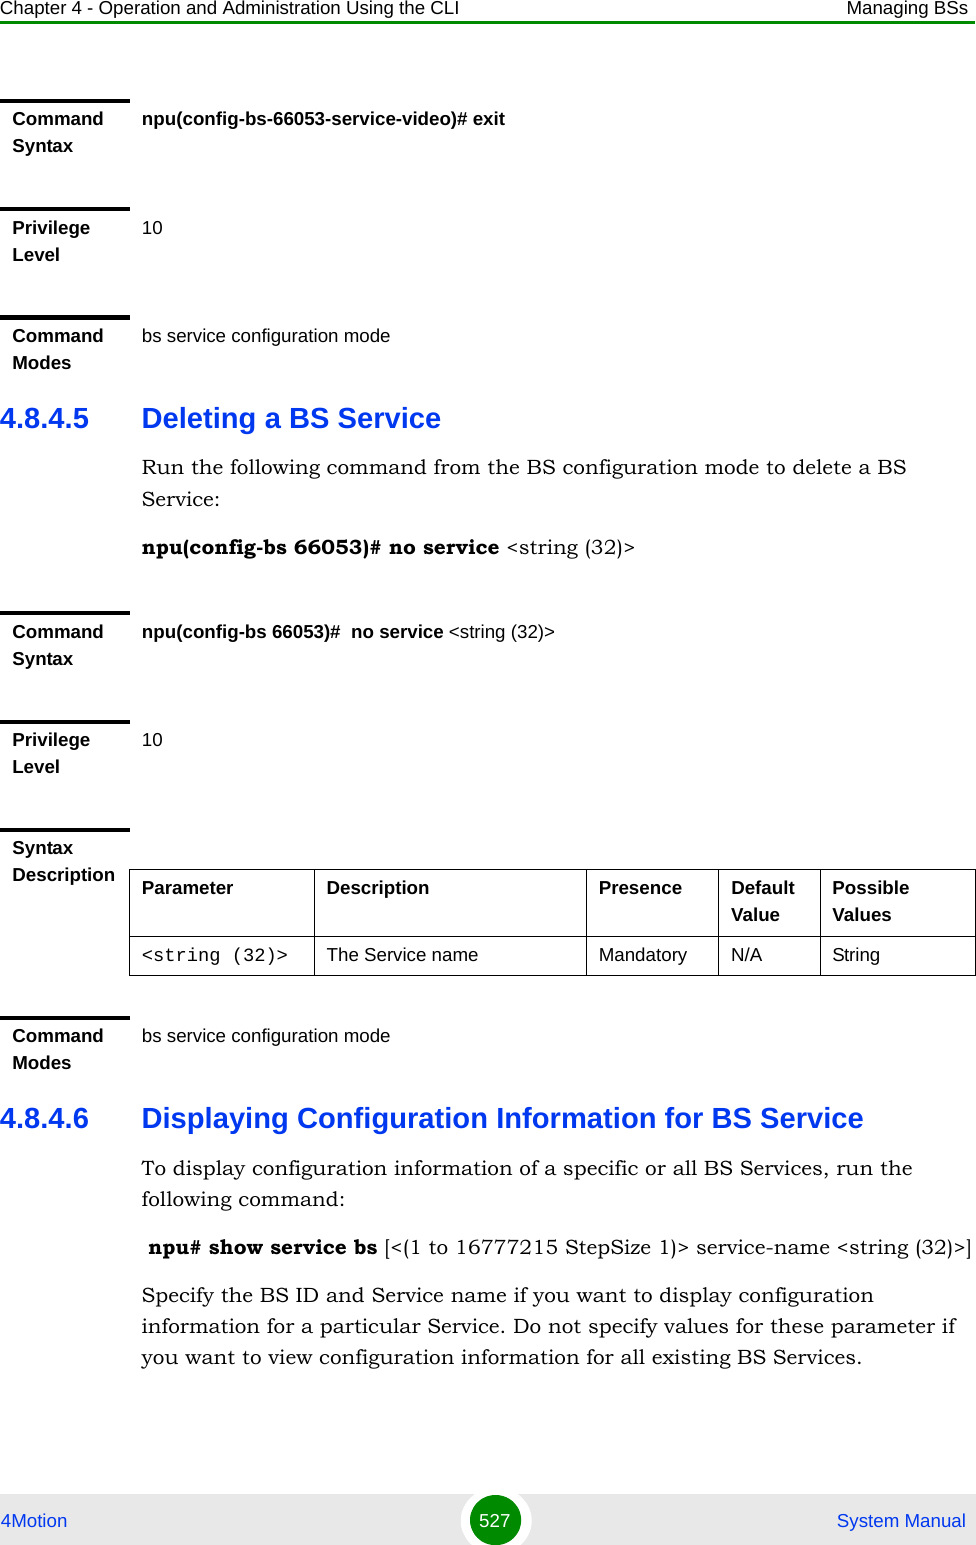 Chapter 4 - Operation and Administration Using the CLI Managing BSs4Motion 527  System Manual4.8.4.5 Deleting a BS ServiceRun the following command from the BS configuration mode to delete a BS Service:npu(config-bs 66053)# no service &lt;string (32)&gt; 4.8.4.6 Displaying Configuration Information for BS ServiceTo display configuration information of a specific or all BS Services, run the following command: npu# show service bs [&lt;(1 to 16777215 StepSize 1)&gt; service-name &lt;string (32)&gt;]Specify the BS ID and Service name if you want to display configuration information for a particular Service. Do not specify values for these parameter if you want to view configuration information for all existing BS Services.Command Syntaxnpu(config-bs-66053-service-video)# exitPrivilege Level10Command Modesbs service configuration modeCommand Syntaxnpu(config-bs 66053)#  no service &lt;string (32)&gt; Privilege Level10Syntax Description Parameter Description Presence Default ValuePossible Values&lt;string (32)&gt; The Service name  Mandatory N/A StringCommand Modesbs service configuration mode